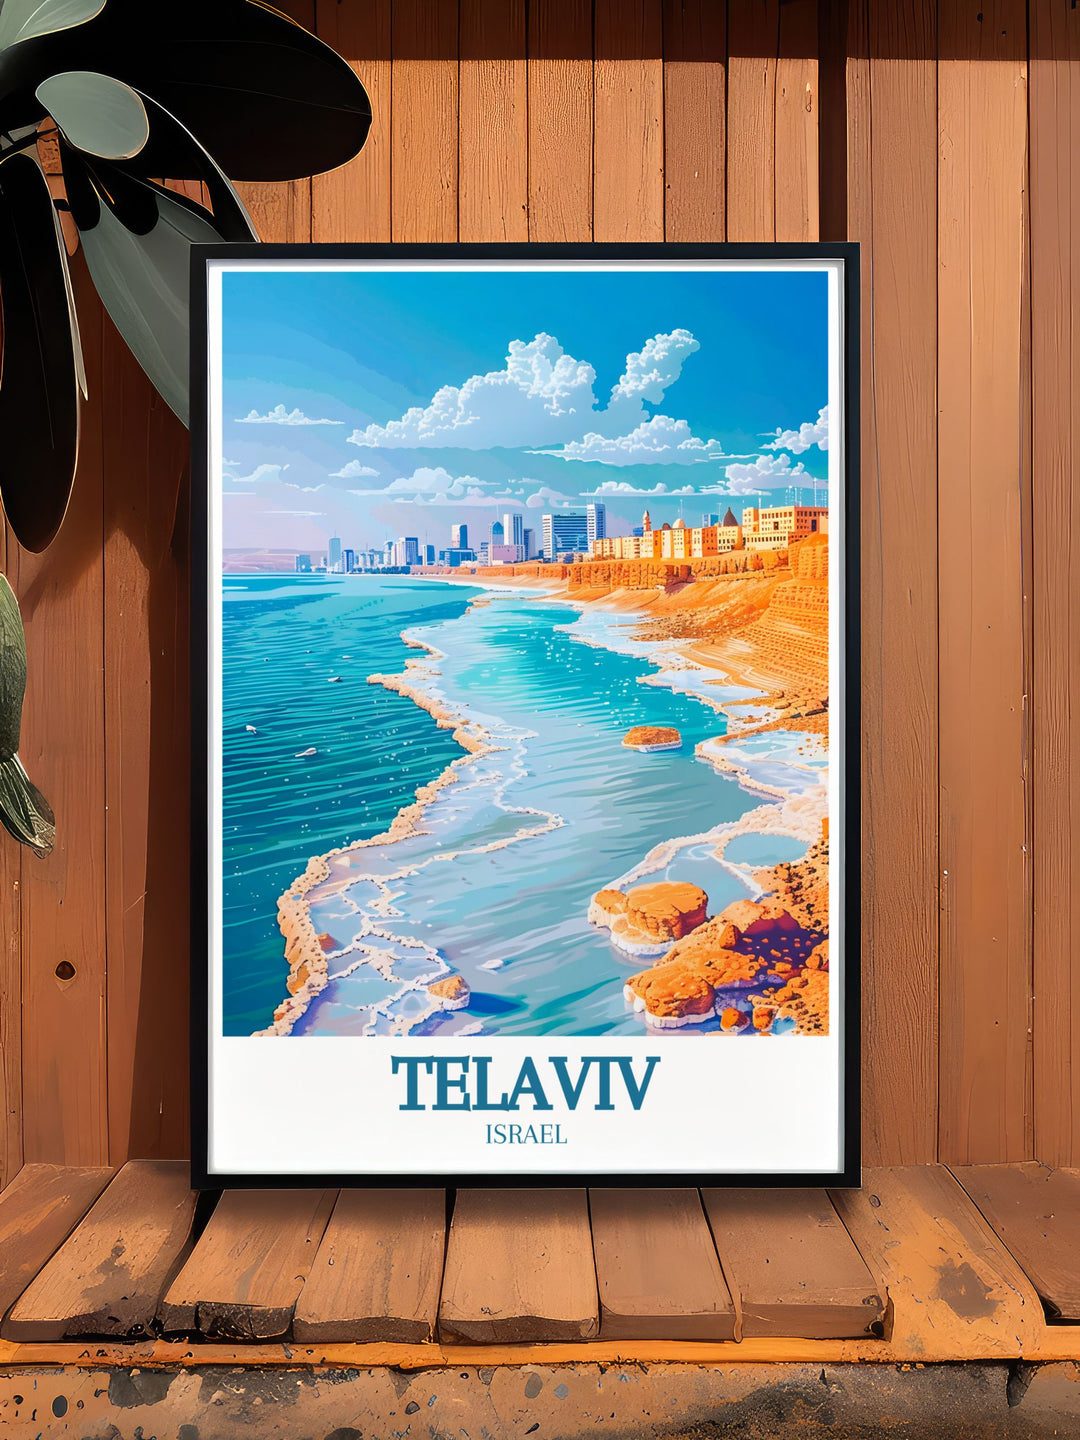 Showcasing the historical richness of Jaffa, this travel poster features ancient landmarks and cultural sites. Ideal for history enthusiasts, this piece brings the fascinating history of the port city into your home.